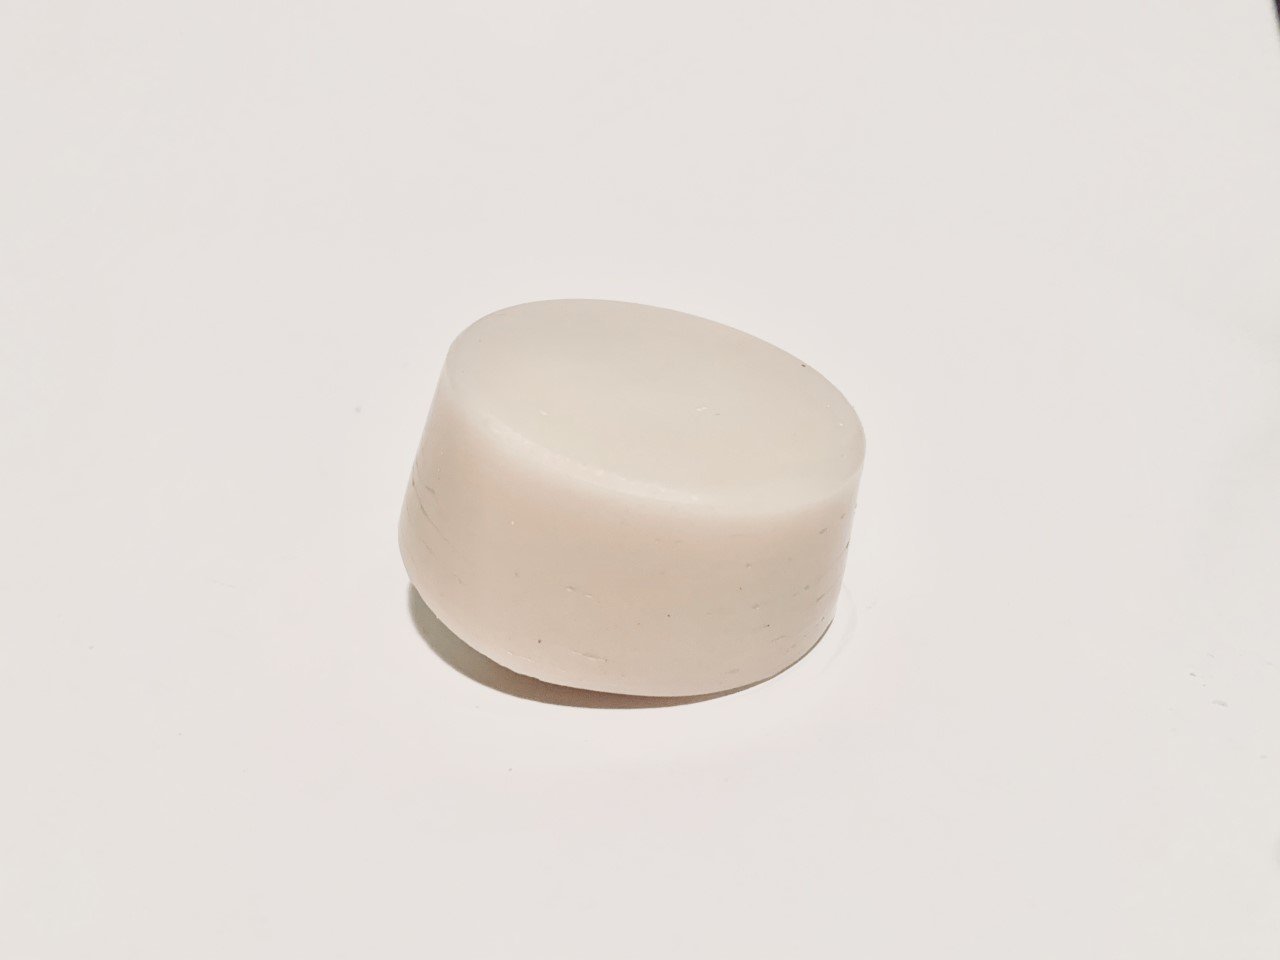 be YOU Conditioner Bar CASE (6) - WHOLESALE be YOU - nelsonnaturals remineralizing toothpaste